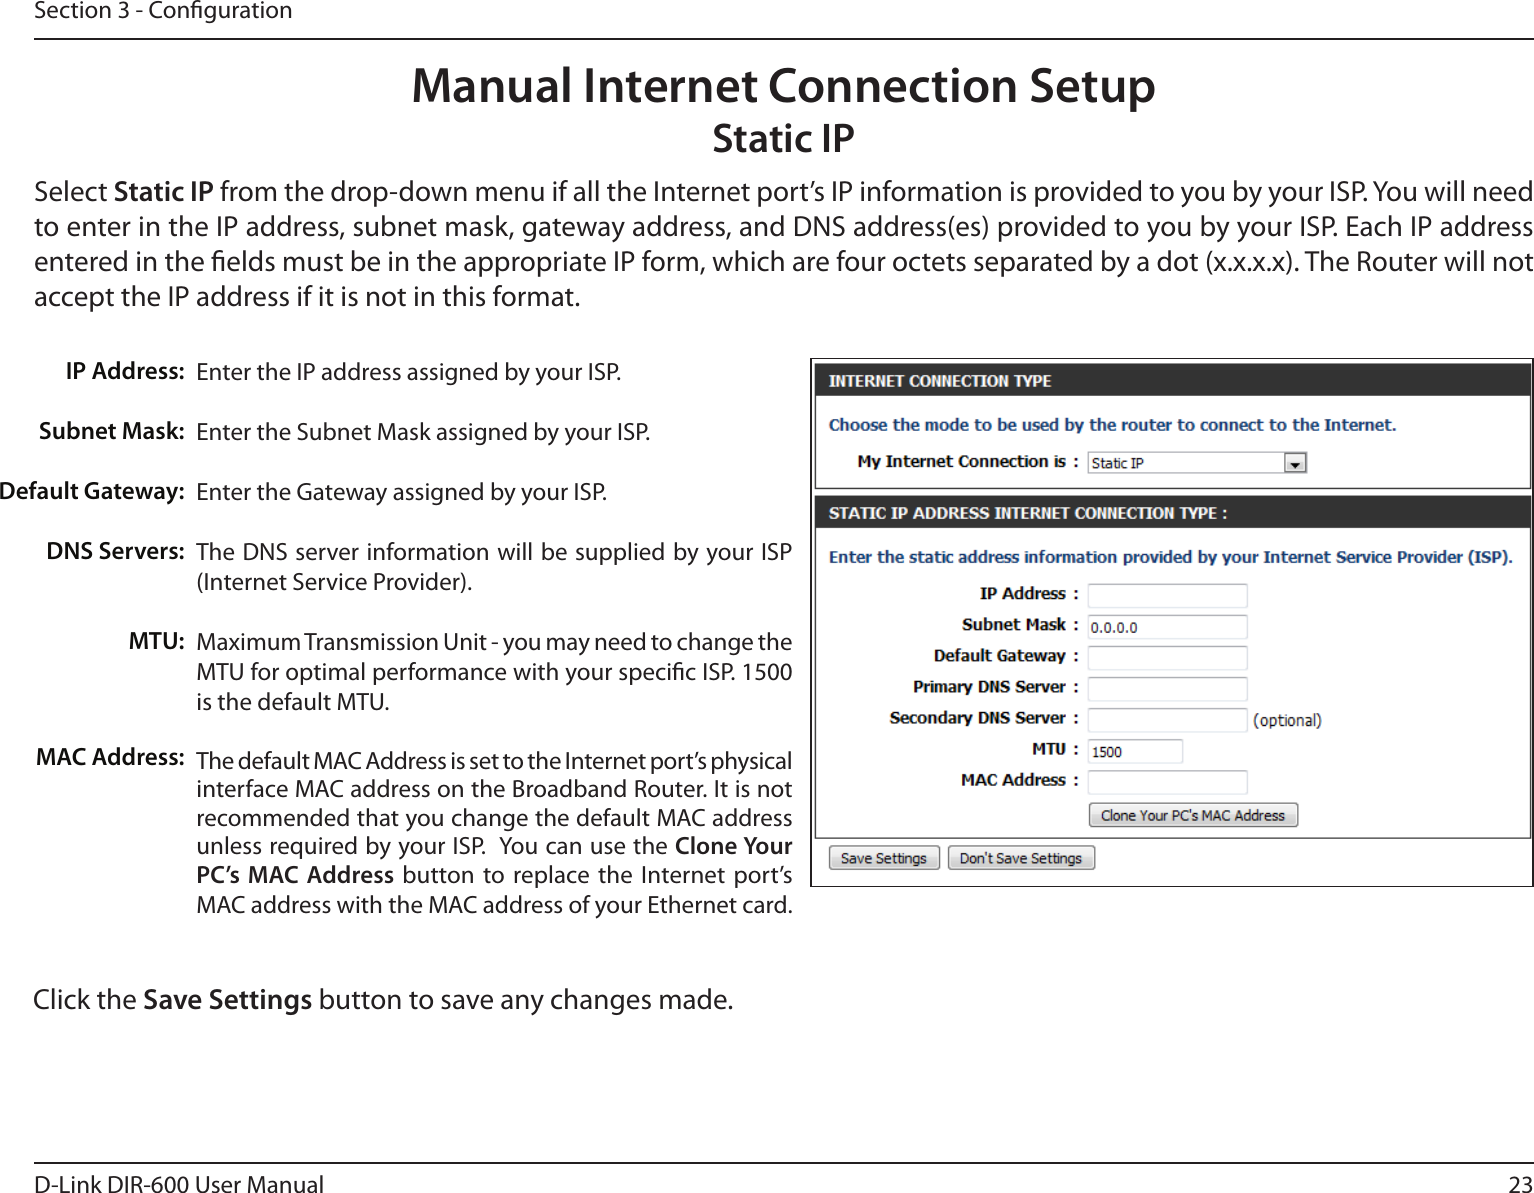 23D-Link DIR-600 User ManualSection 3 - CongurationEnter the IP address assigned by your ISP.Enter the Subnet Mask assigned by your ISP.Enter the Gateway assigned by your ISP.The DNS server information will be supplied by your ISP (Internet Service Provider).Maximum Transmission Unit - you may need to change the MTU for optimal performance with your specic ISP. 1500 is the default MTU.The default MAC Address is set to the Internet port’s physical interface MAC address on the Broadband Router. It is not recommended that you change the default MAC address unless required by your ISP.  You can use the Clone Your PC’s  MAC Address button to replace the Internet port’s MAC address with the MAC address of your Ethernet card.IP Address:Subnet Mask:Default Gateway:DNS Servers:MTU:MAC Address:Manual Internet Connection SetupStatic IPSelect Static IP from the drop-down menu if all the Internet port’s IP information is provided to you by your ISP. You will need to enter in the IP address, subnet mask, gateway address, and DNS address(es) provided to you by your ISP. Each IP address entered in the elds must be in the appropriate IP form, which are four octets separated by a dot (x.x.x.x). The Router will not accept the IP address if it is not in this format.Click the Save Settings button to save any changes made.